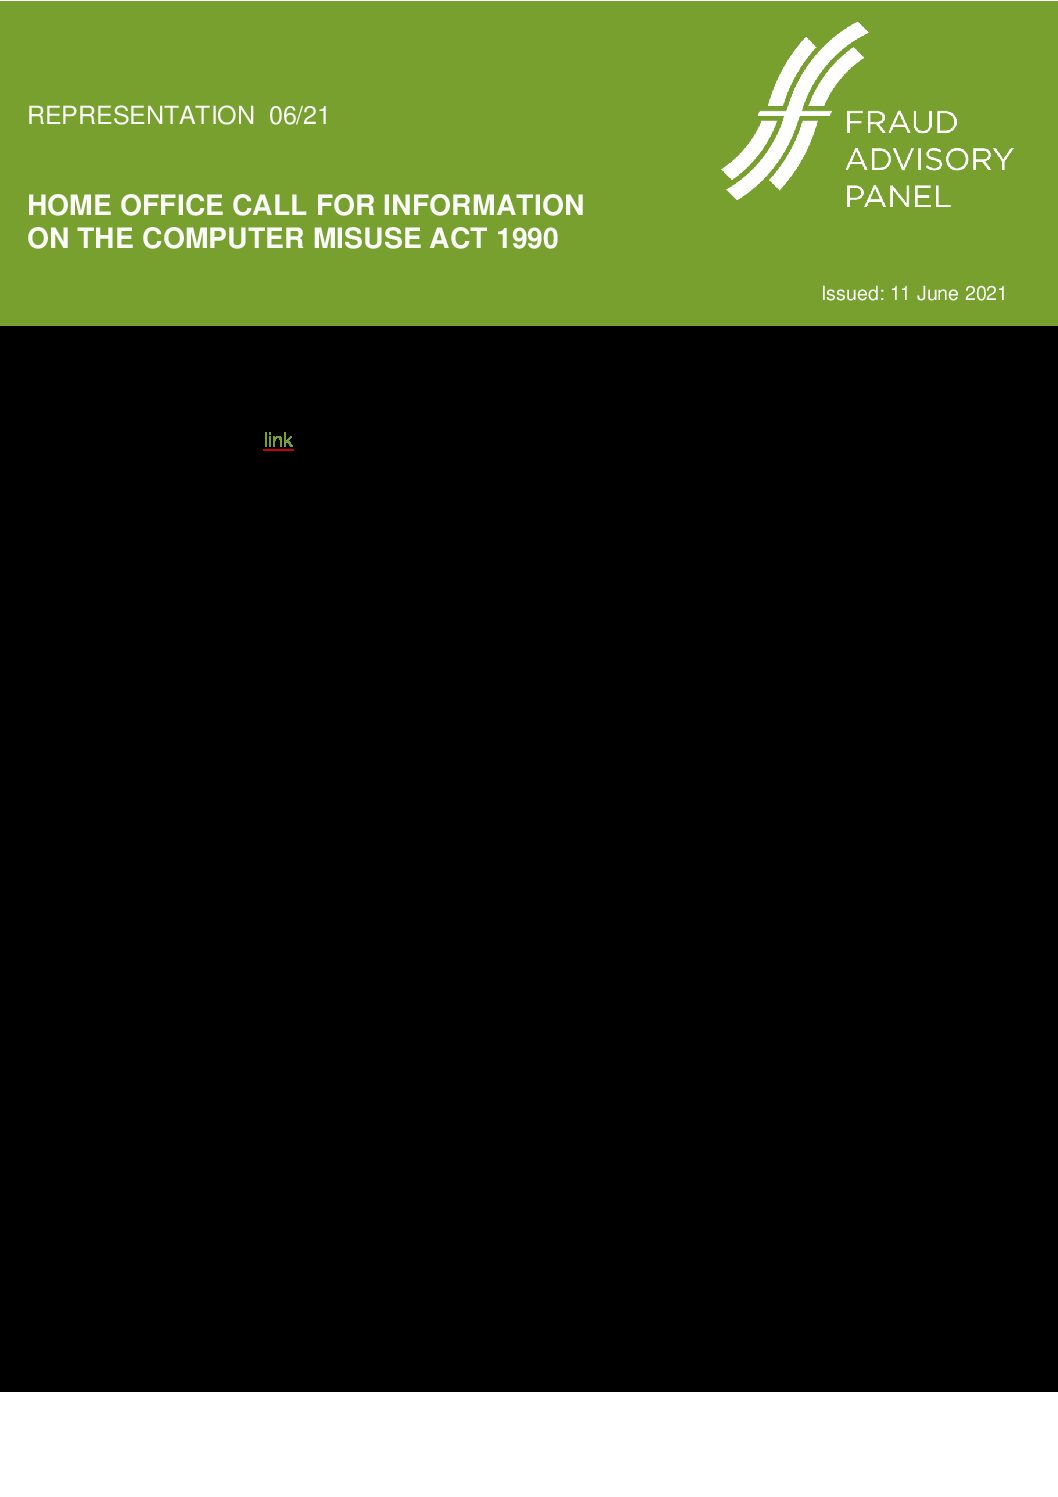 FAP Response to HO Computer Misuse Act (web) 11June21 document cover